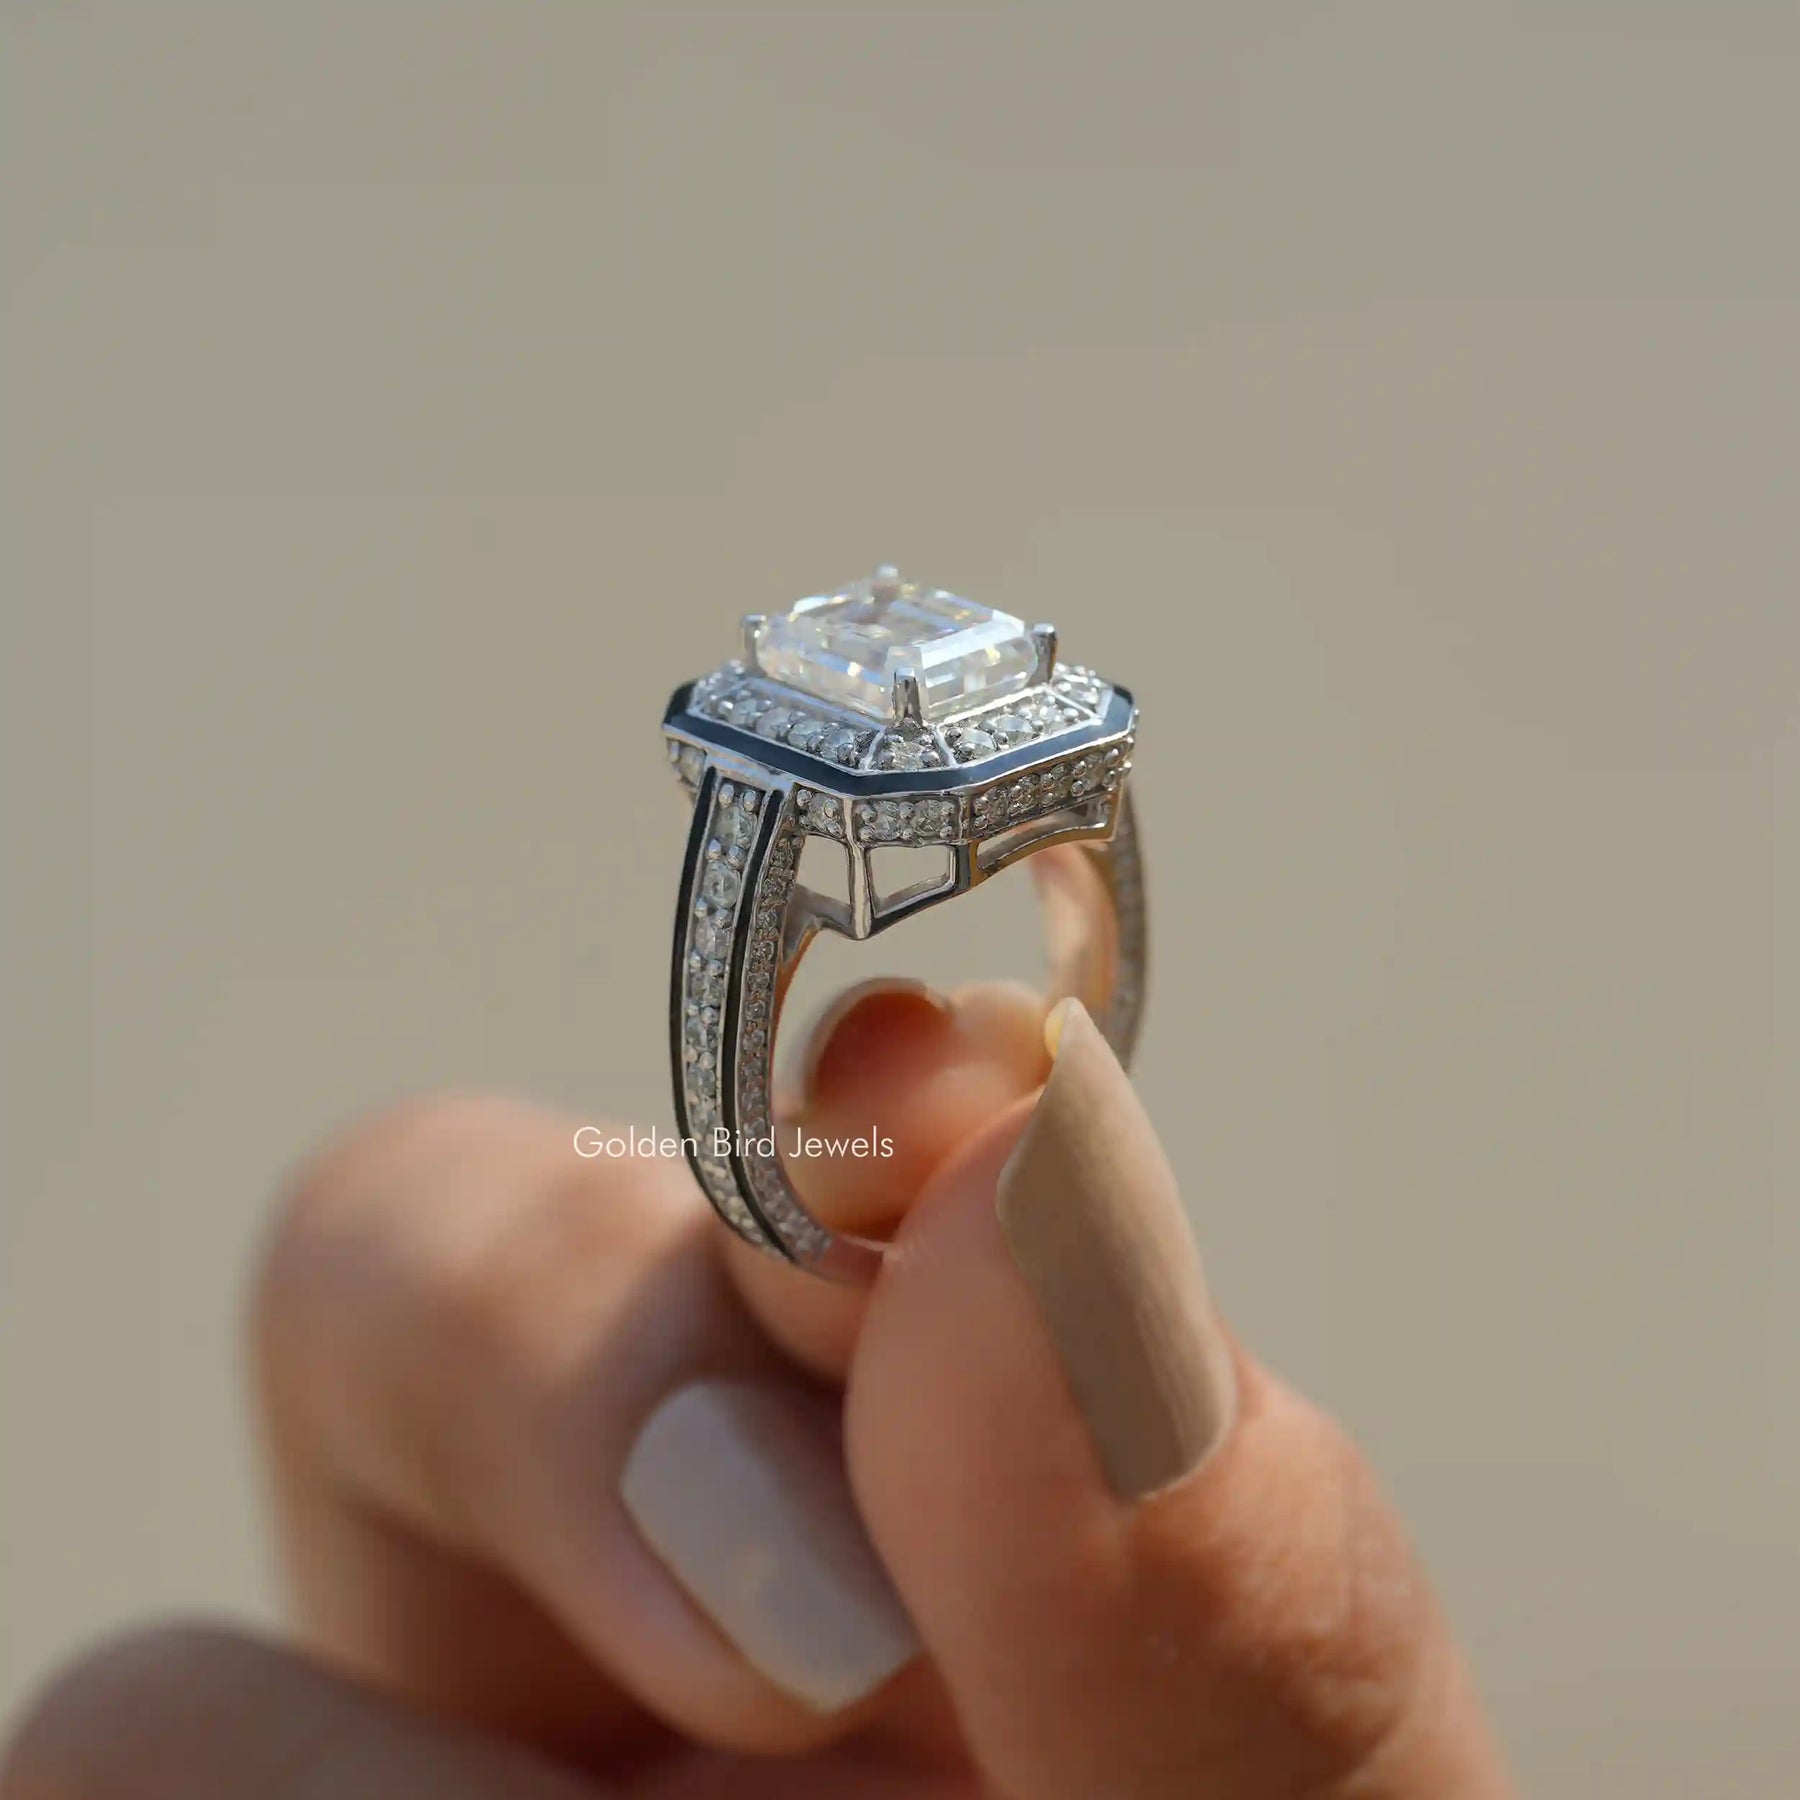 [Moissanite Emerald Cut Halo Engagement Ring Made Of Halo Setting]-[Golden Bird Jewels]